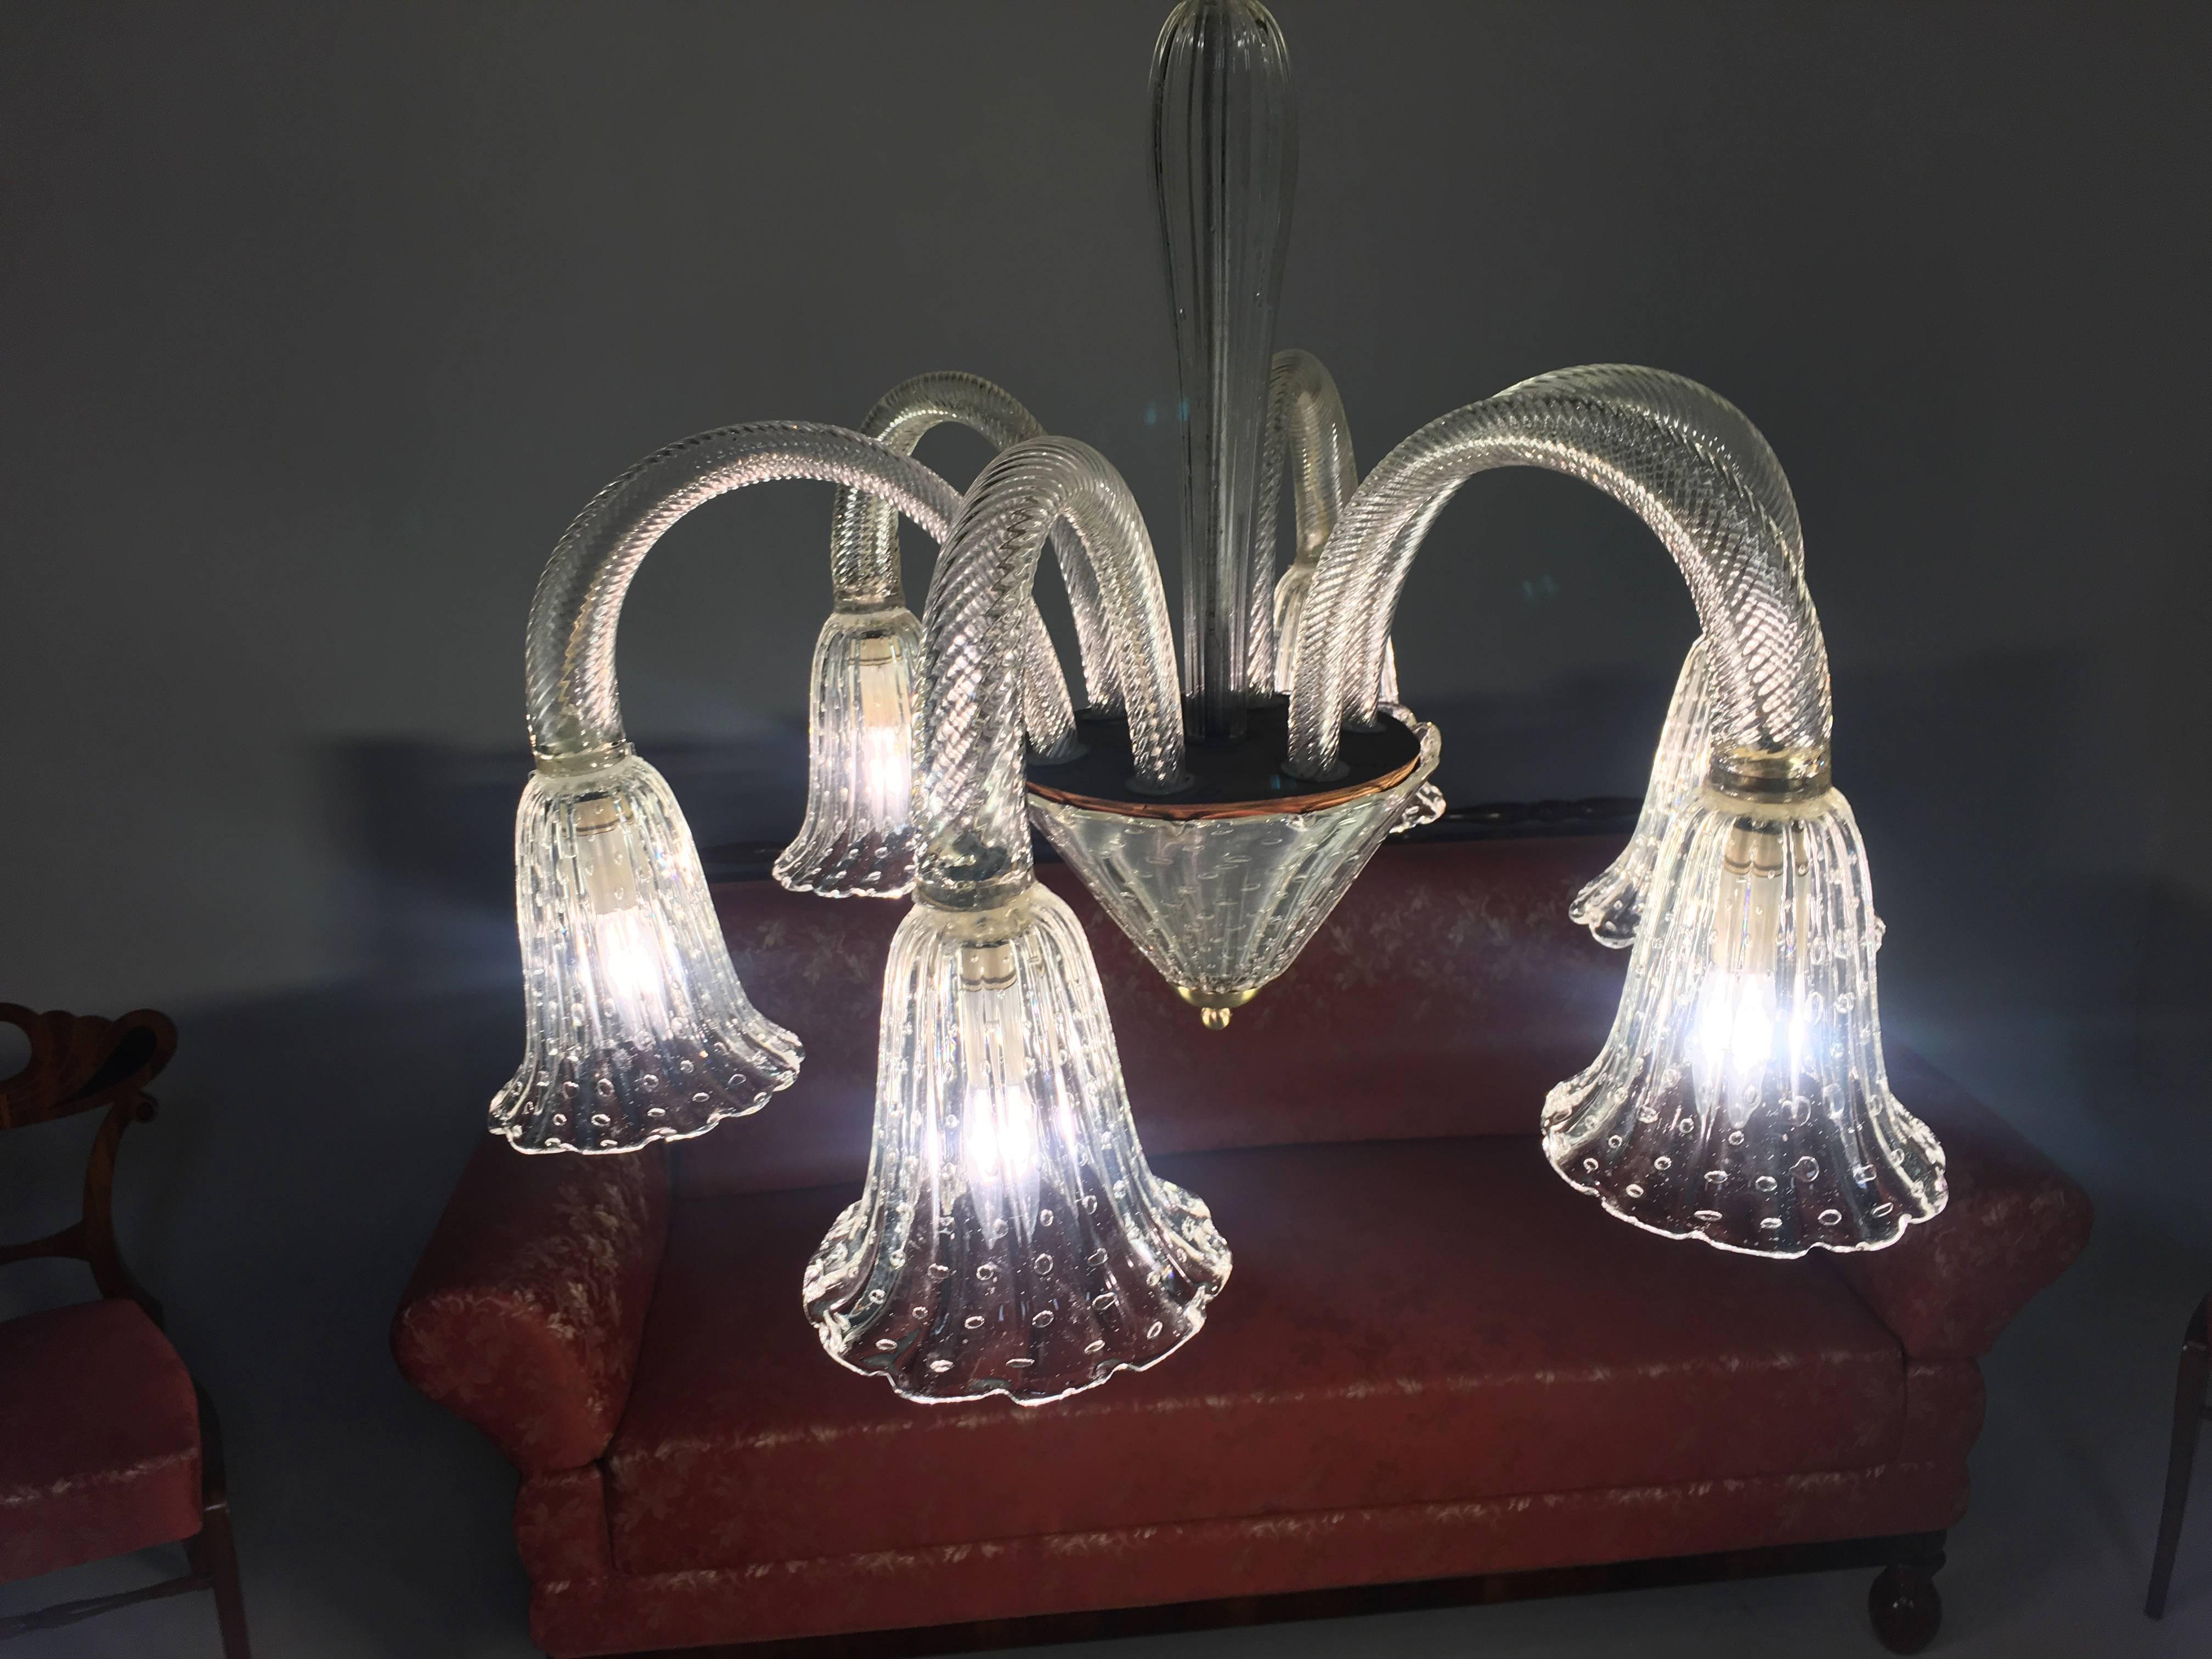 20th Century Luxurious Chandelier by Ercole Barovier, Murano, 1940s